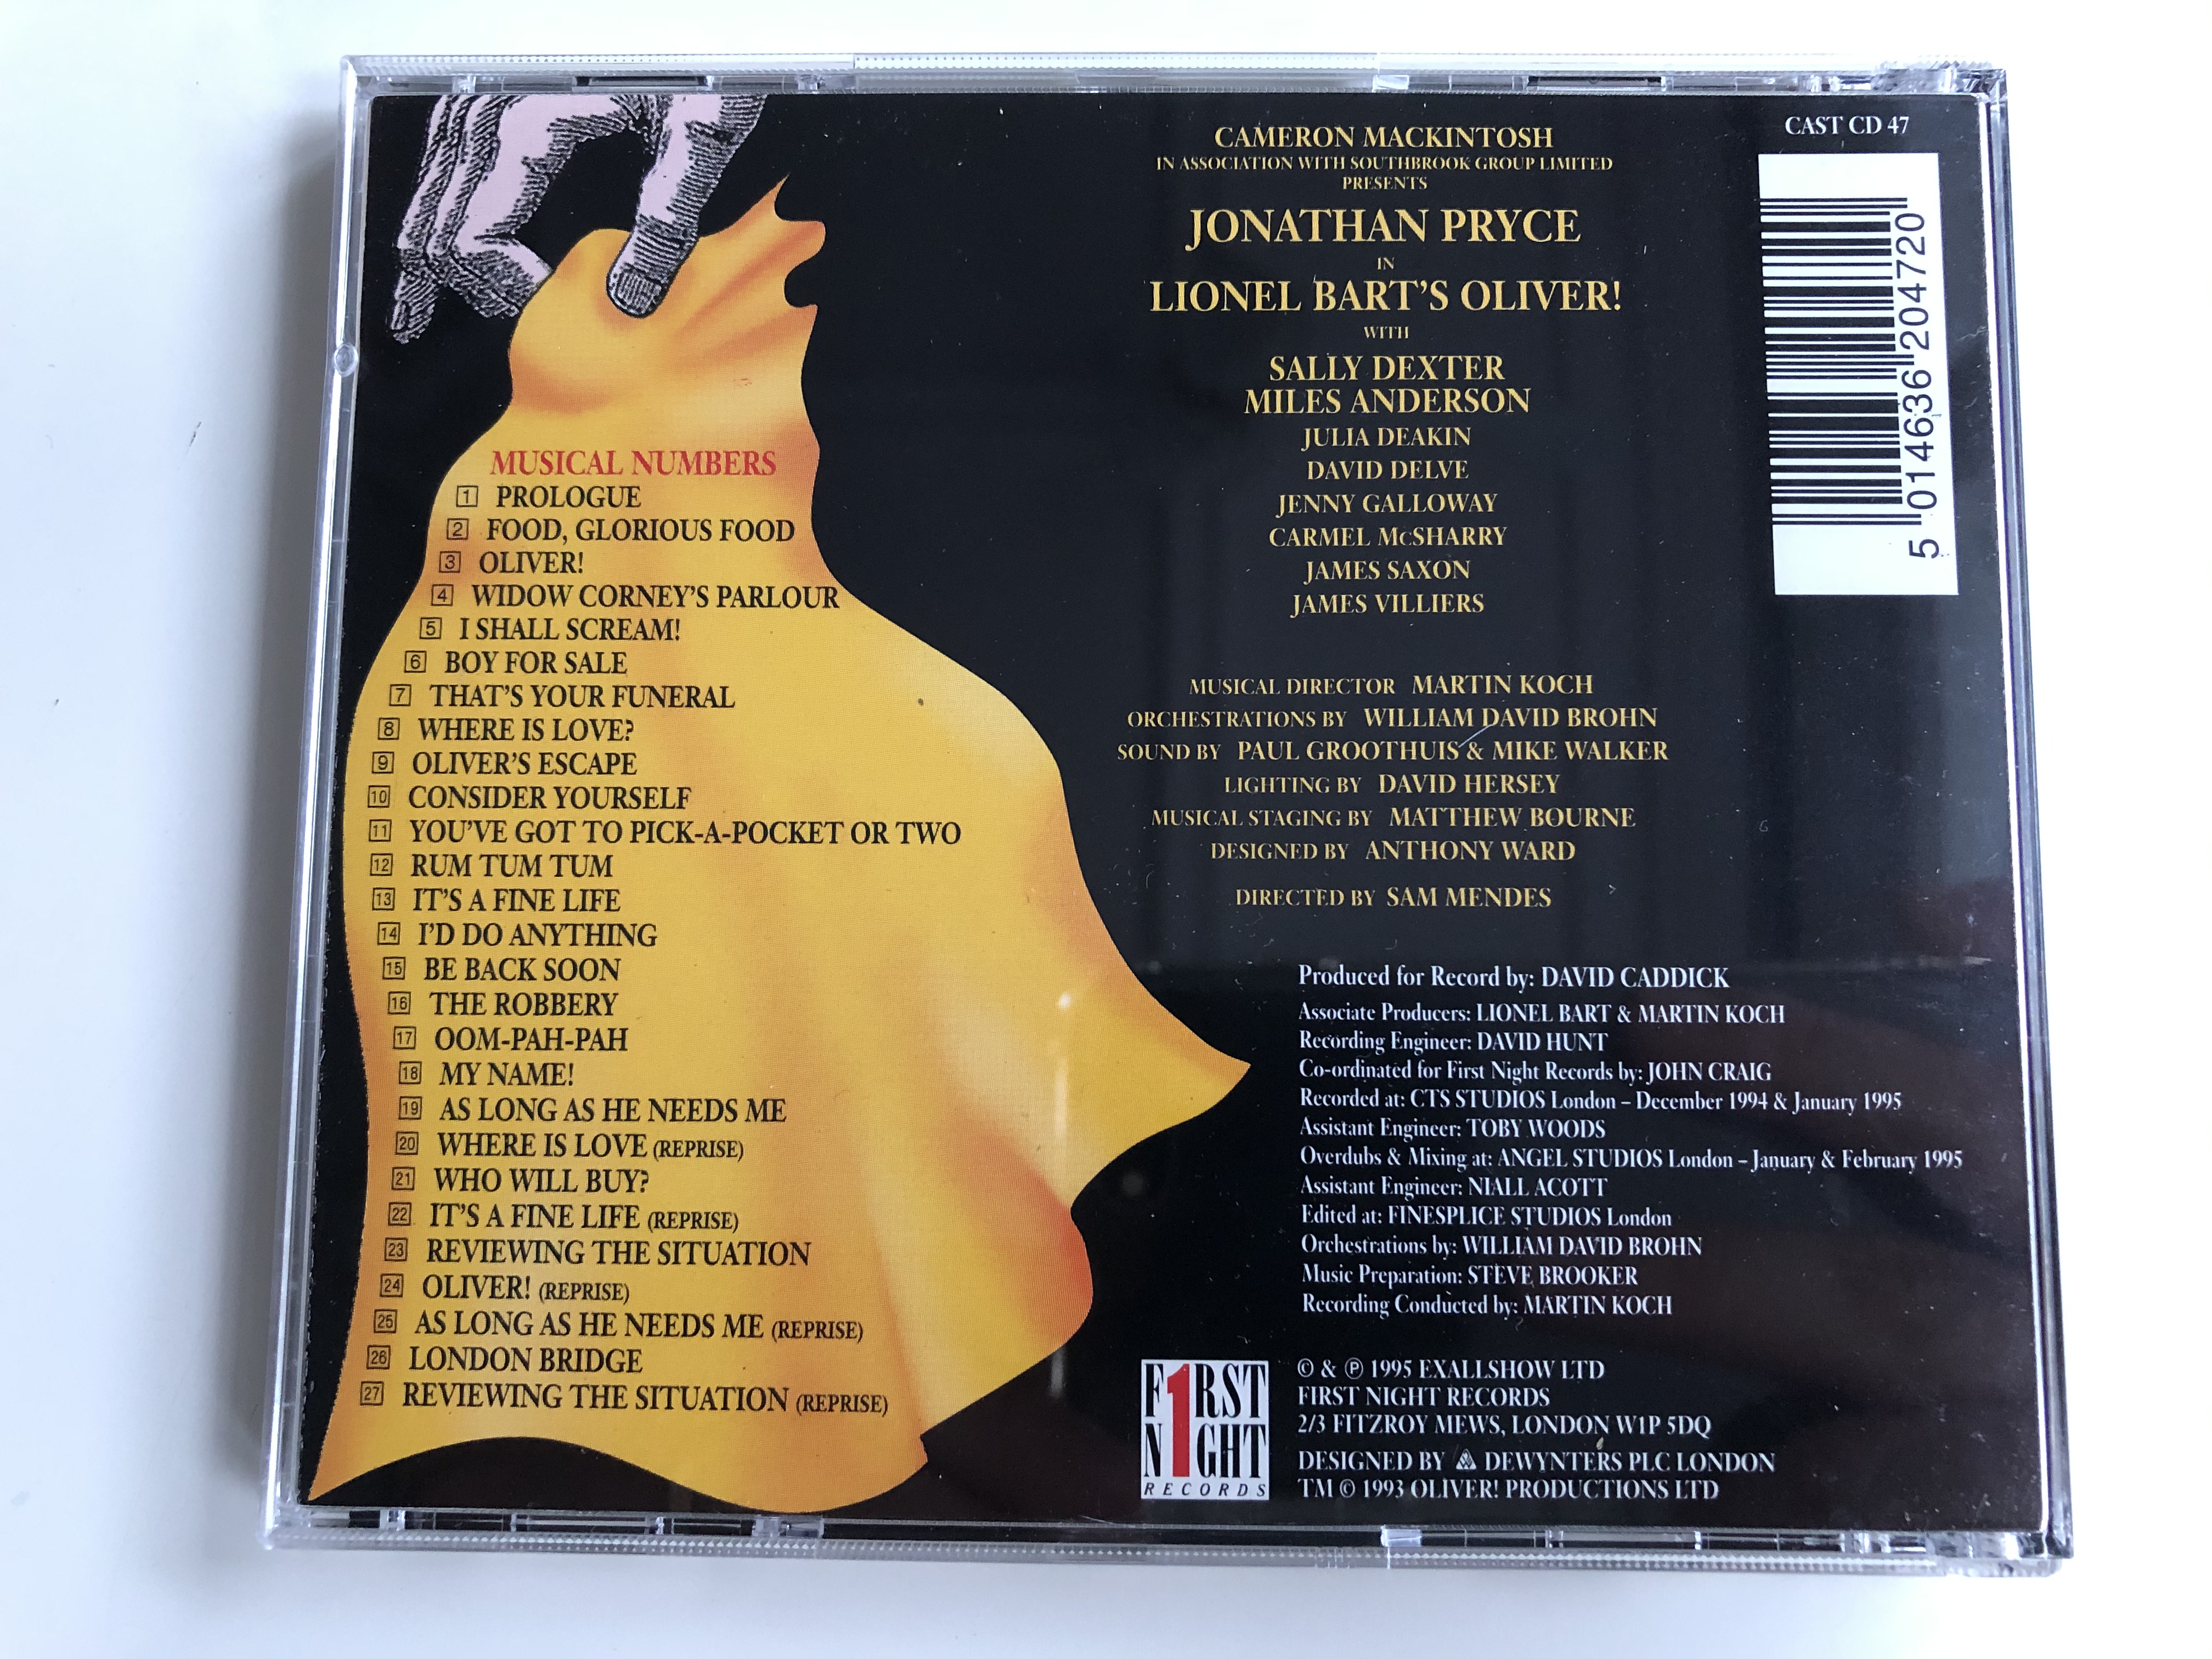 cameron-mackintosh-s-new-production-of-lionel-barts-musical-masterpiece-oliver-the-1994-london-palladium-cast-recording-first-night-records-audio-cd-1995-cast-cd-47-8-.jpg